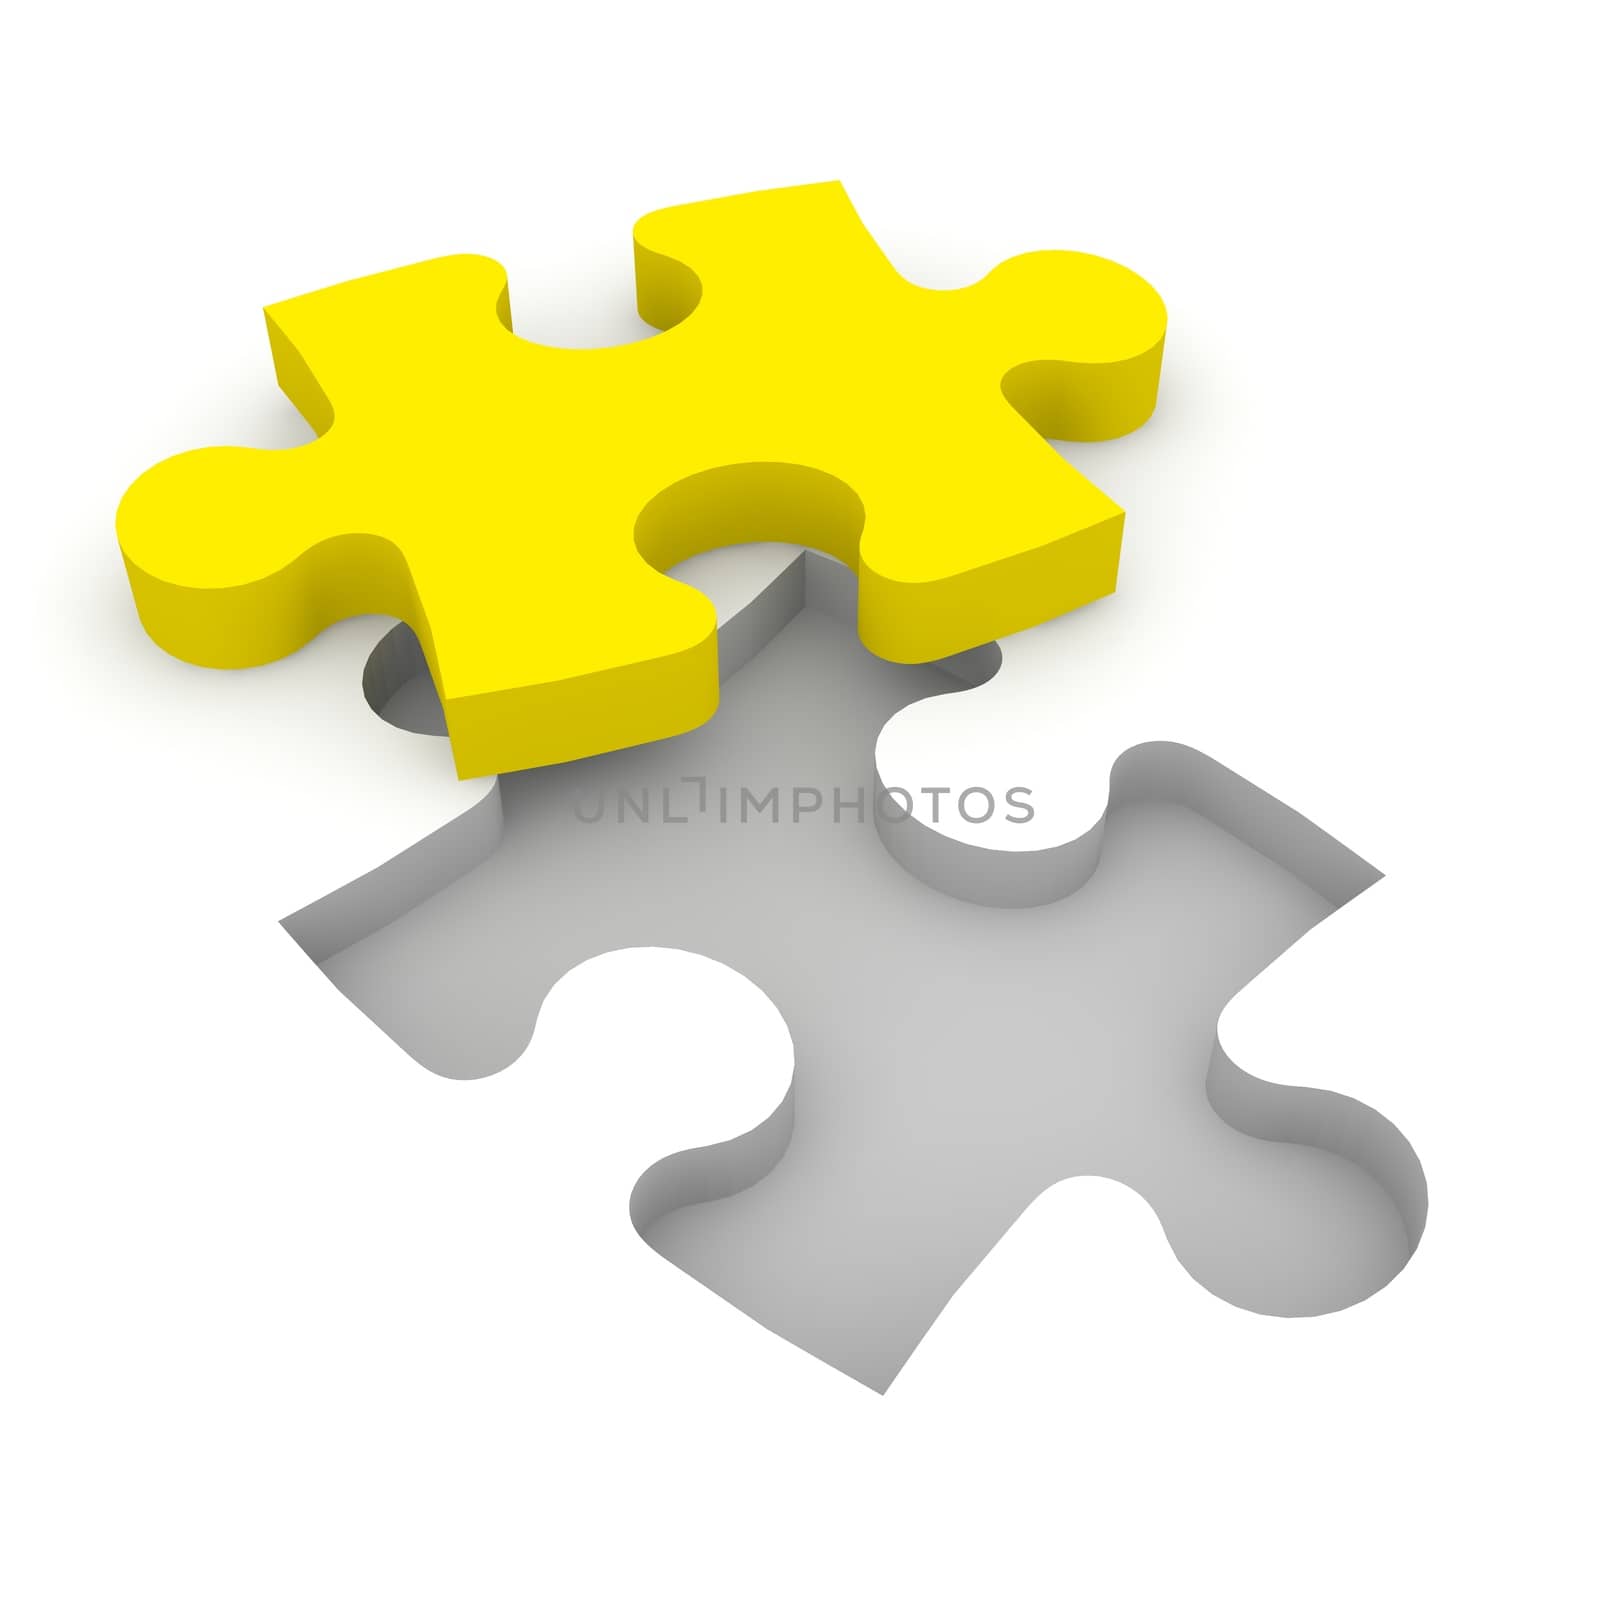 The characters carry a puzzle piece to the appropriate gap.